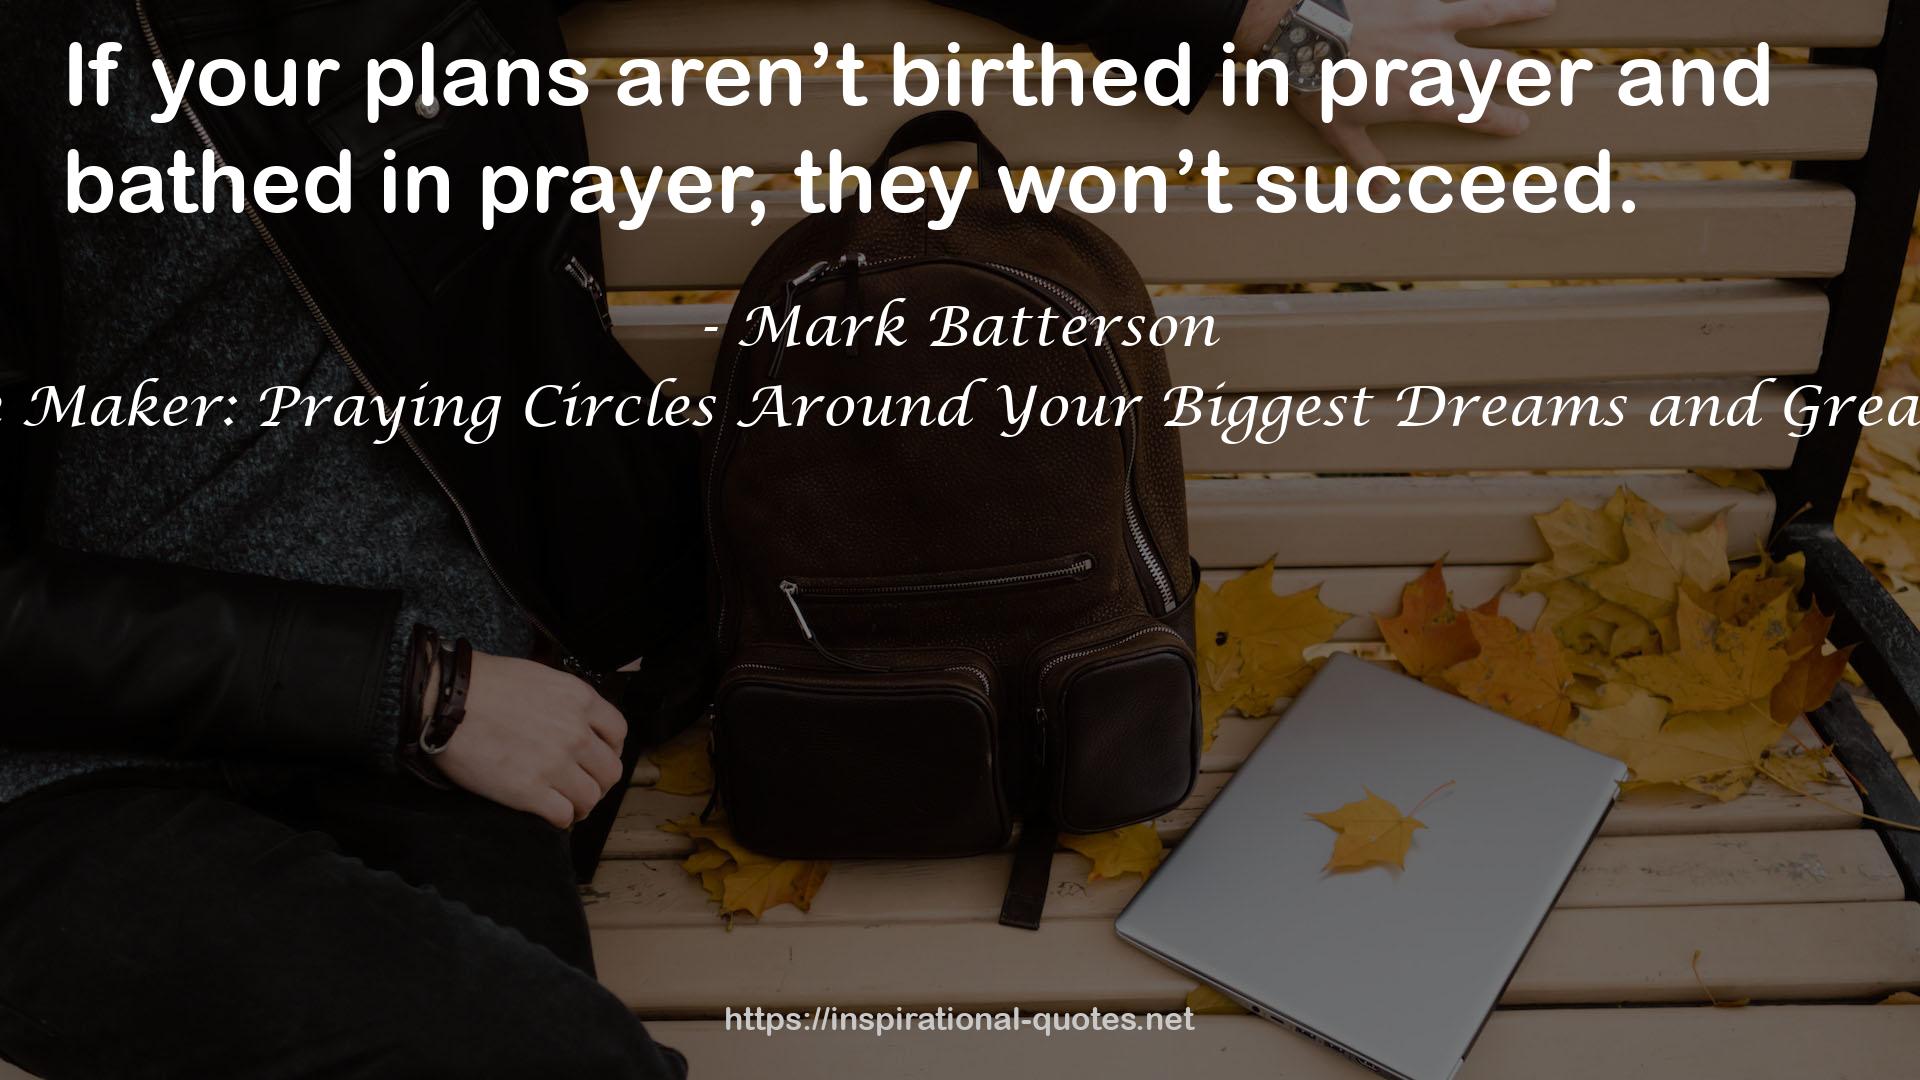 The Circle Maker: Praying Circles Around Your Biggest Dreams and Greatest Fears QUOTES